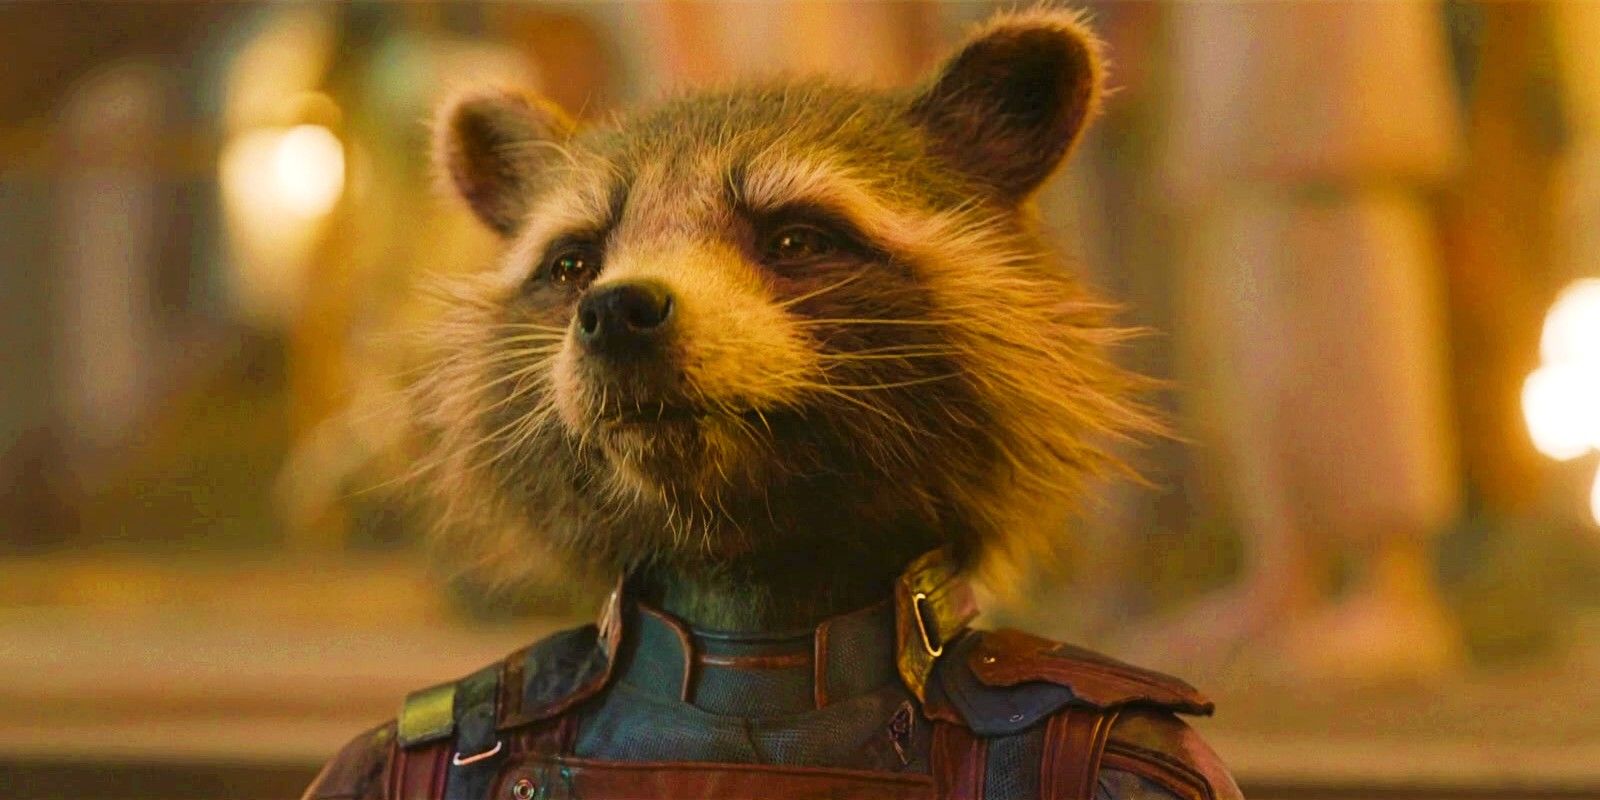 james-gunn-explains-rocket-raccoon’s-name-meaning-so-perfectly-it-makes-guardians-of-the-galaxy-3-even-better